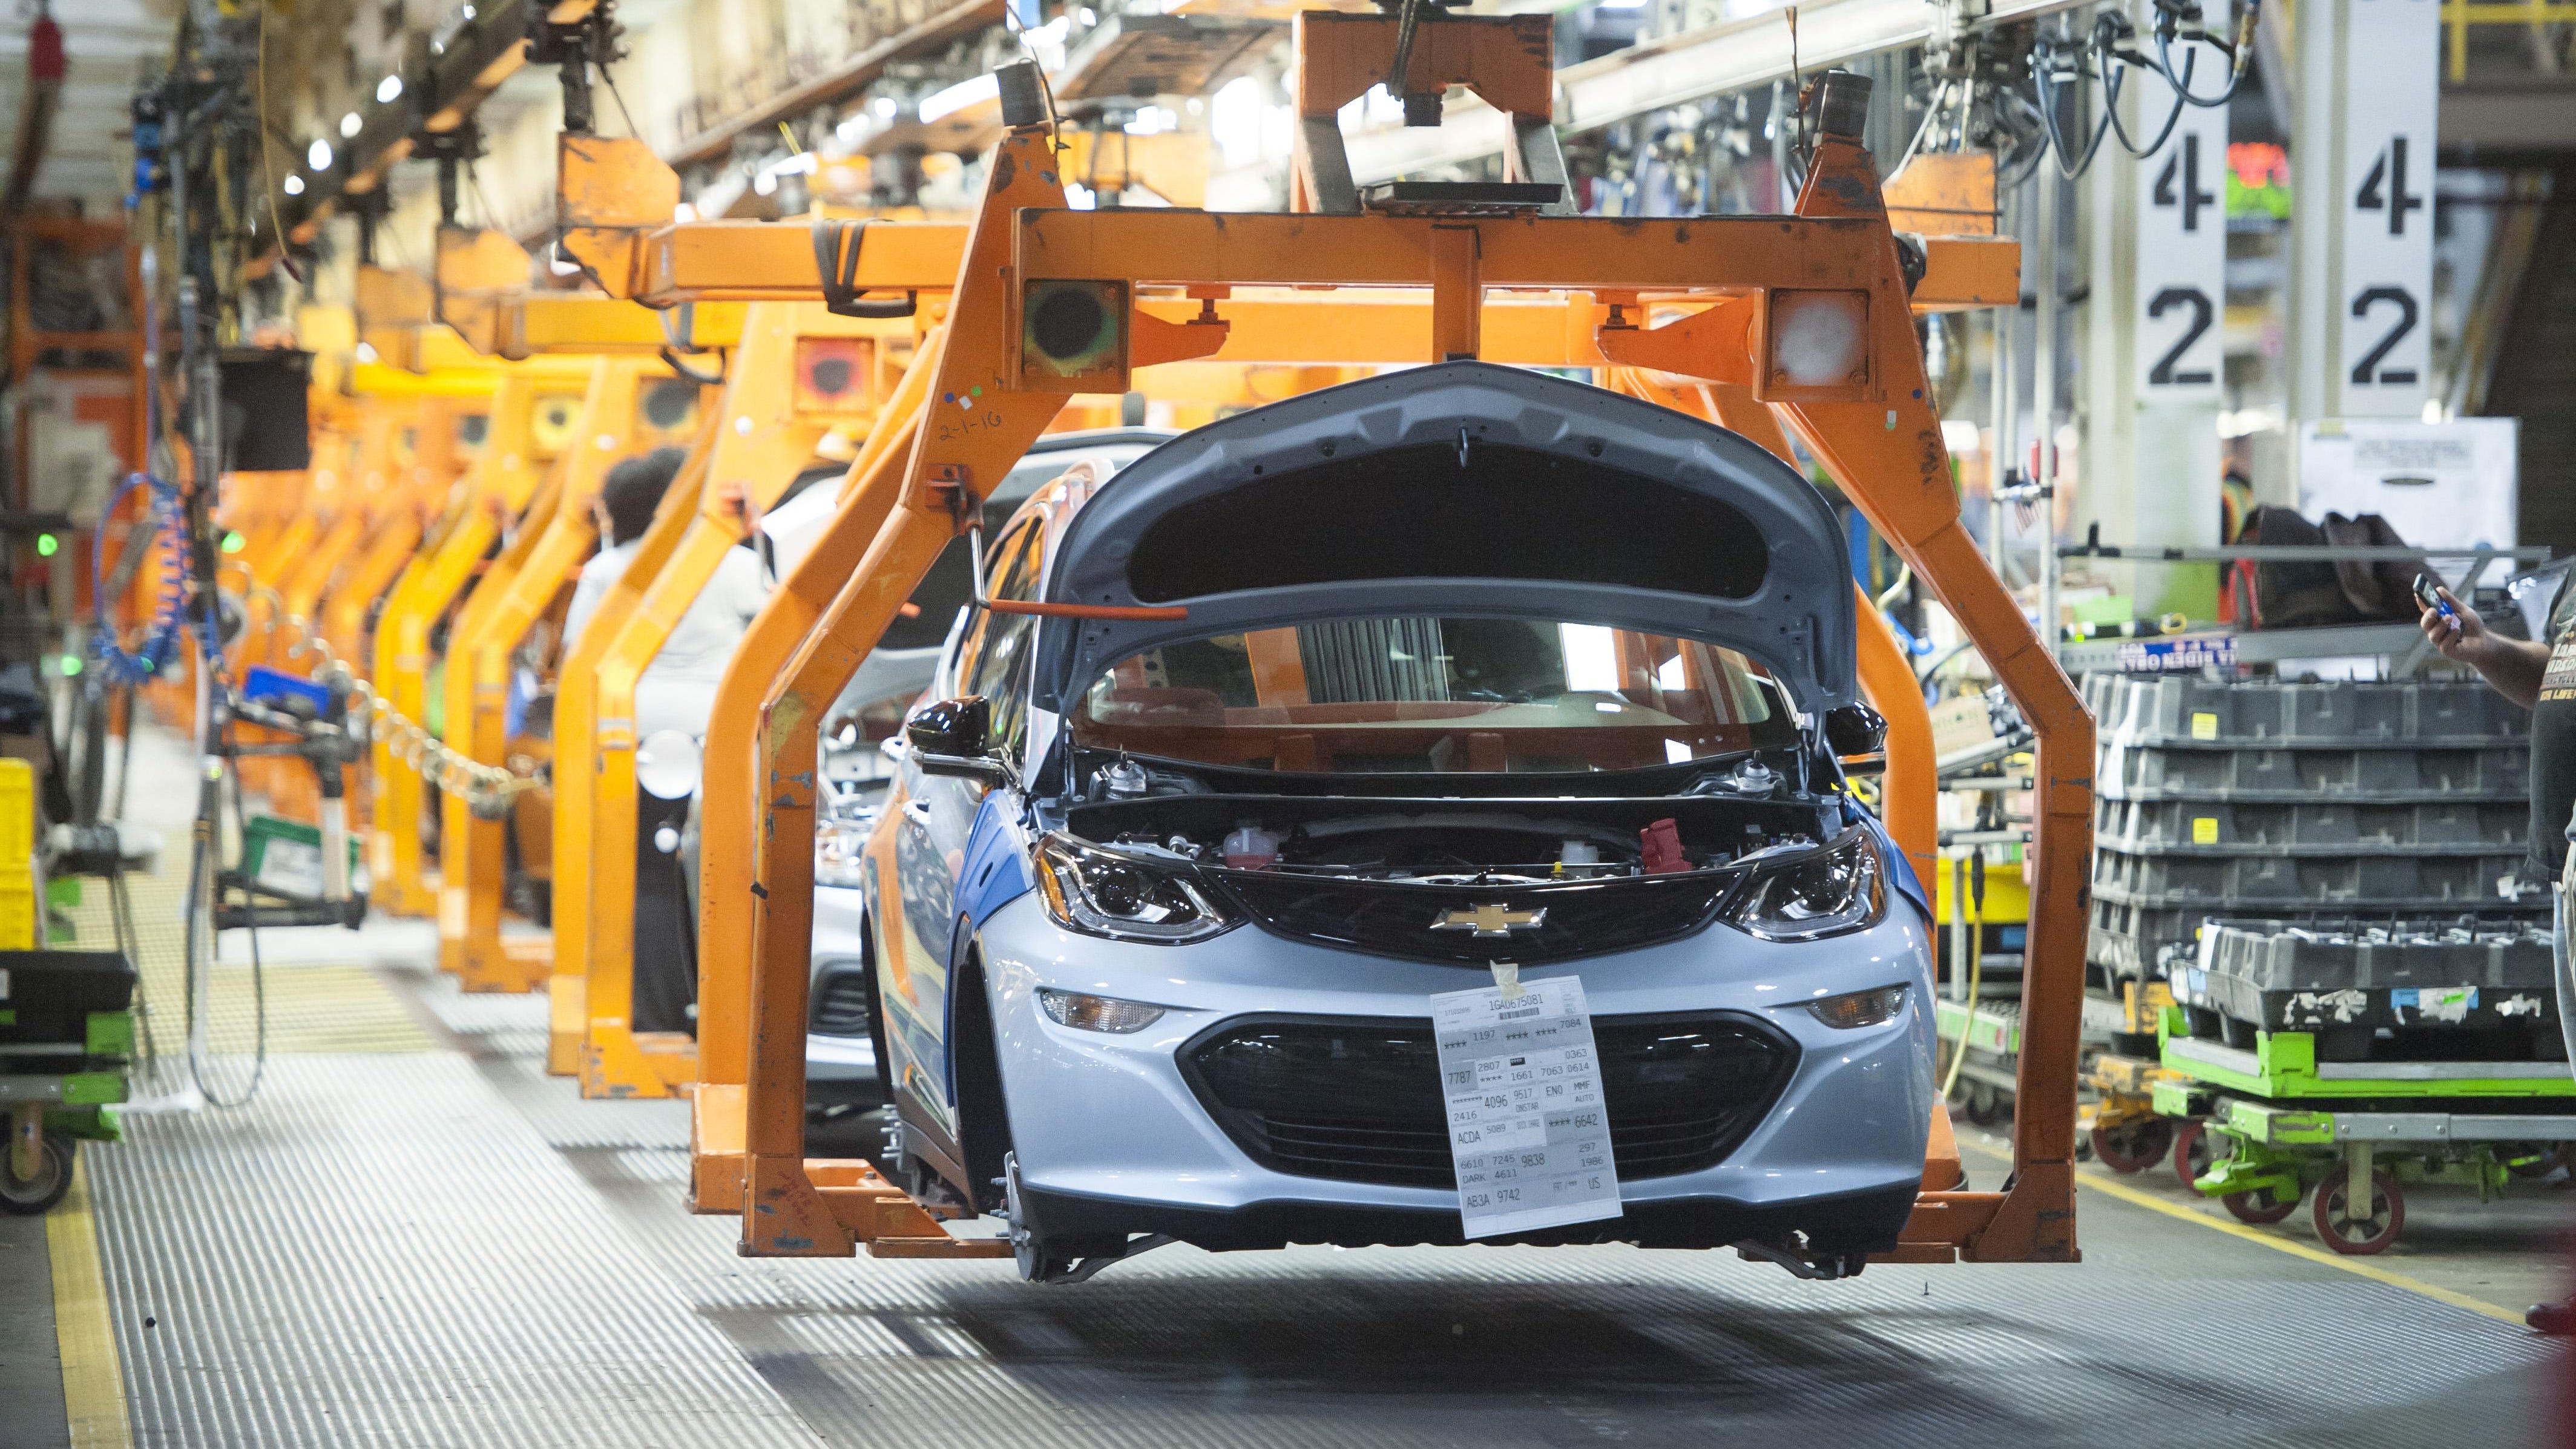 A 2017 Chevrolet Bolt EV makes its way down the assembly line during production of the vehicle at the General Motors assembly plant in Lake Orion in this Dec. 6, 2016 file photo.